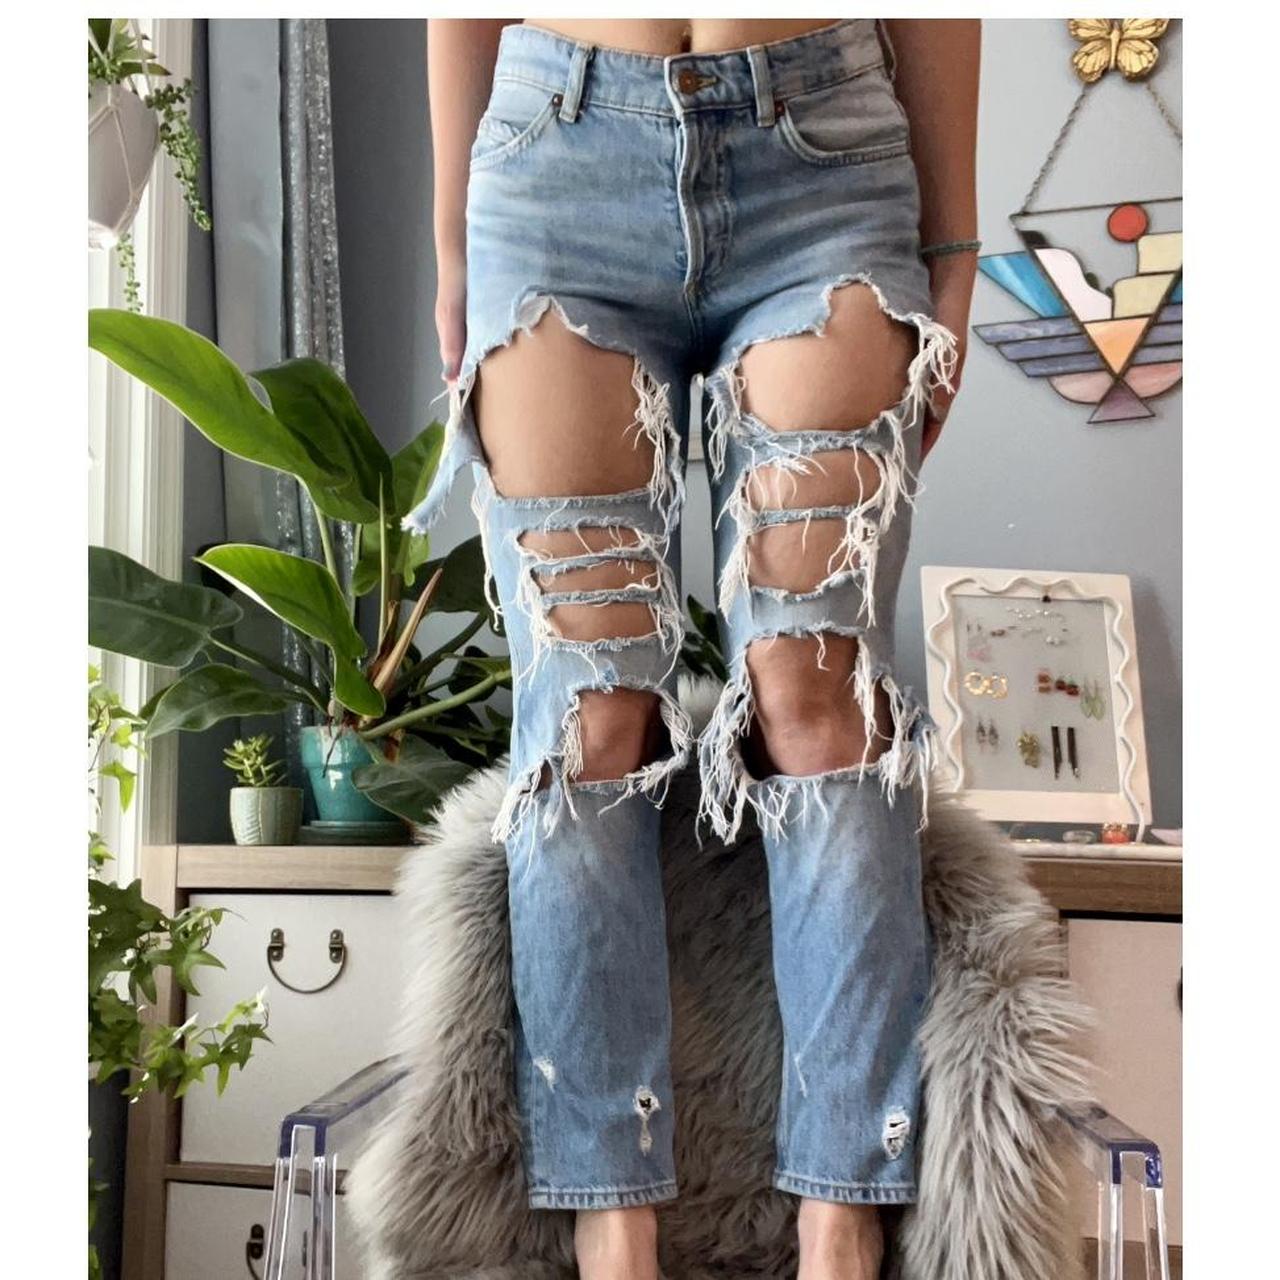 American Eagle ripped jeans!, Love these for beach